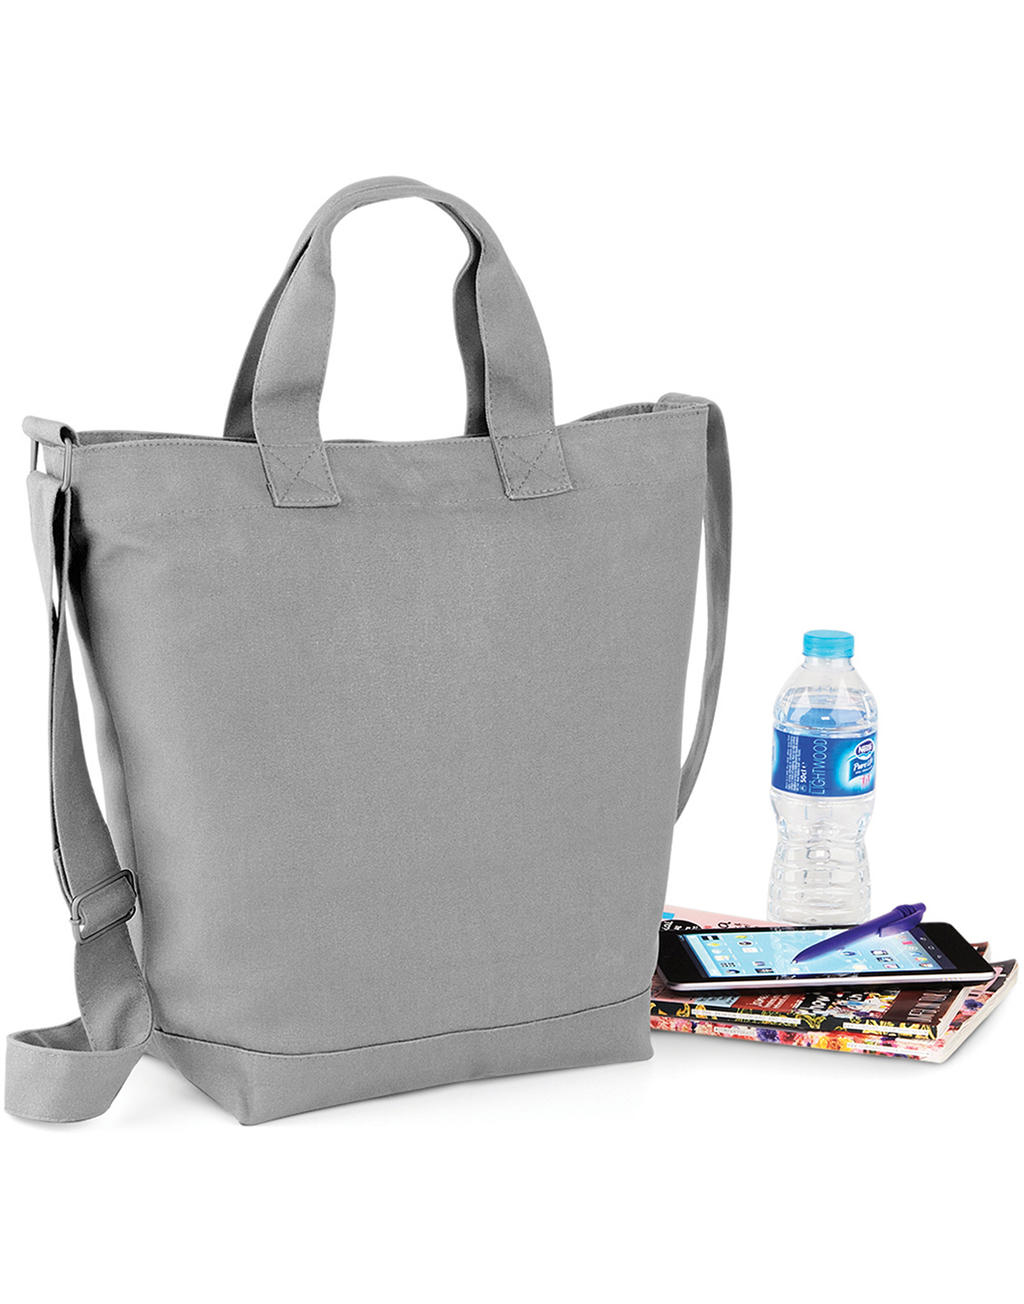  Canvas Day Bag in Farbe Natural